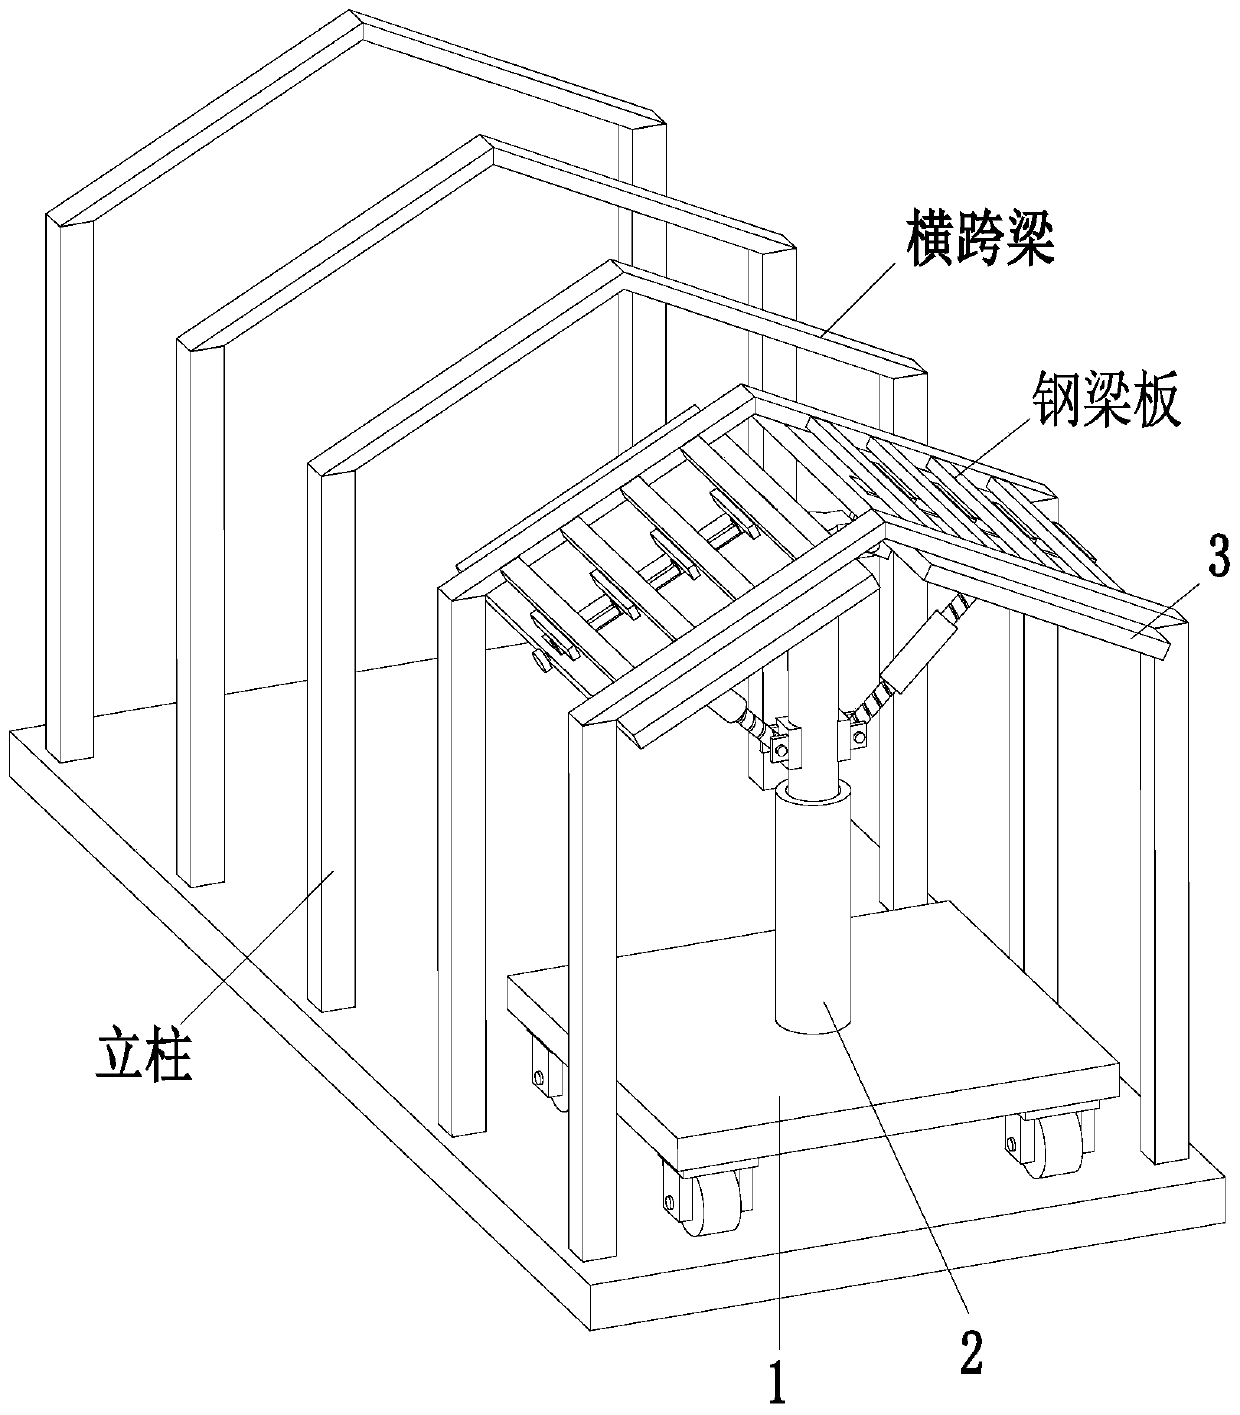 Construction method of light steel roof for assembly building